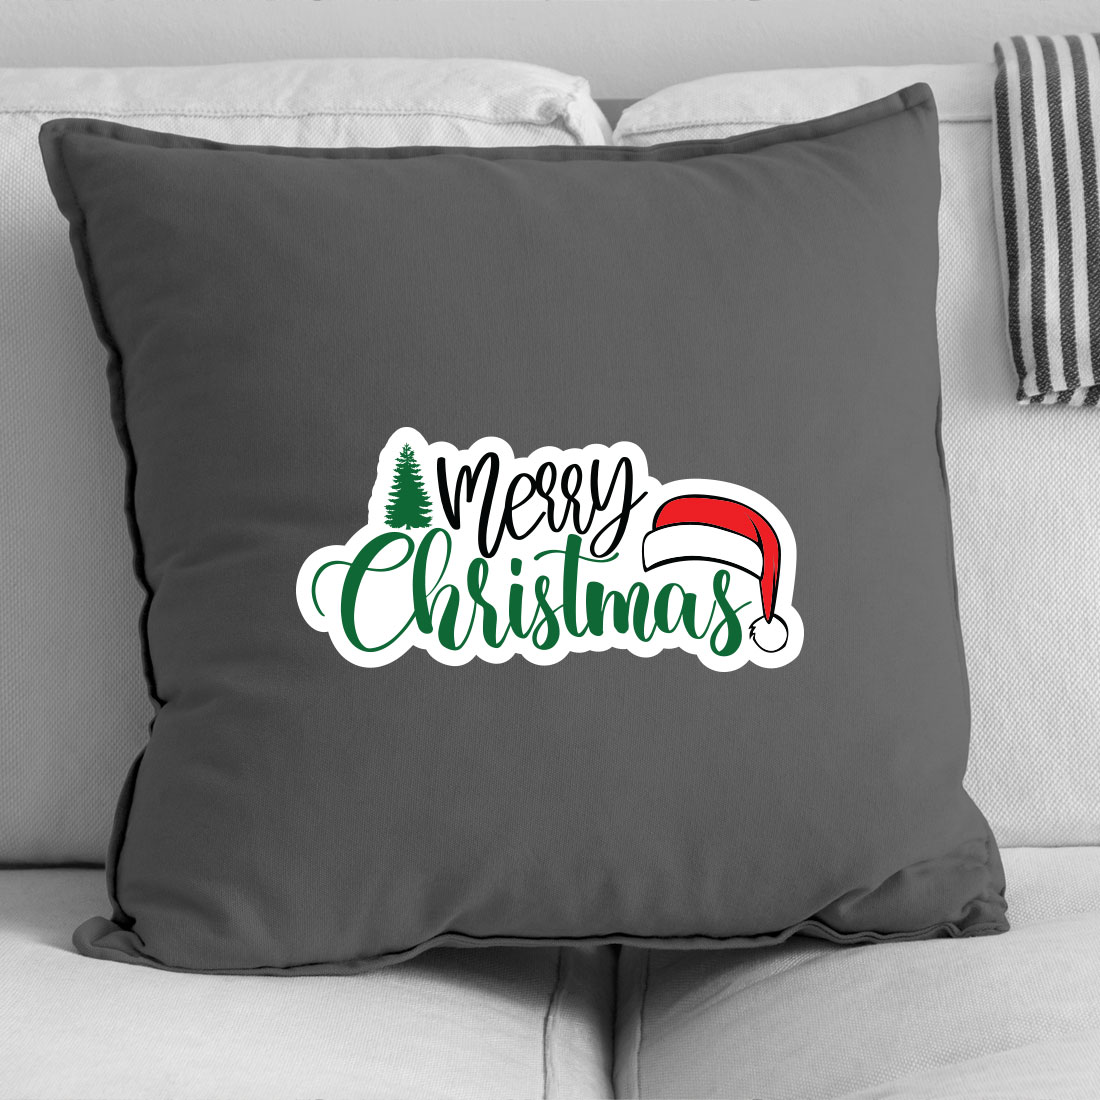 Grey pillow with a merry christmas message on it.